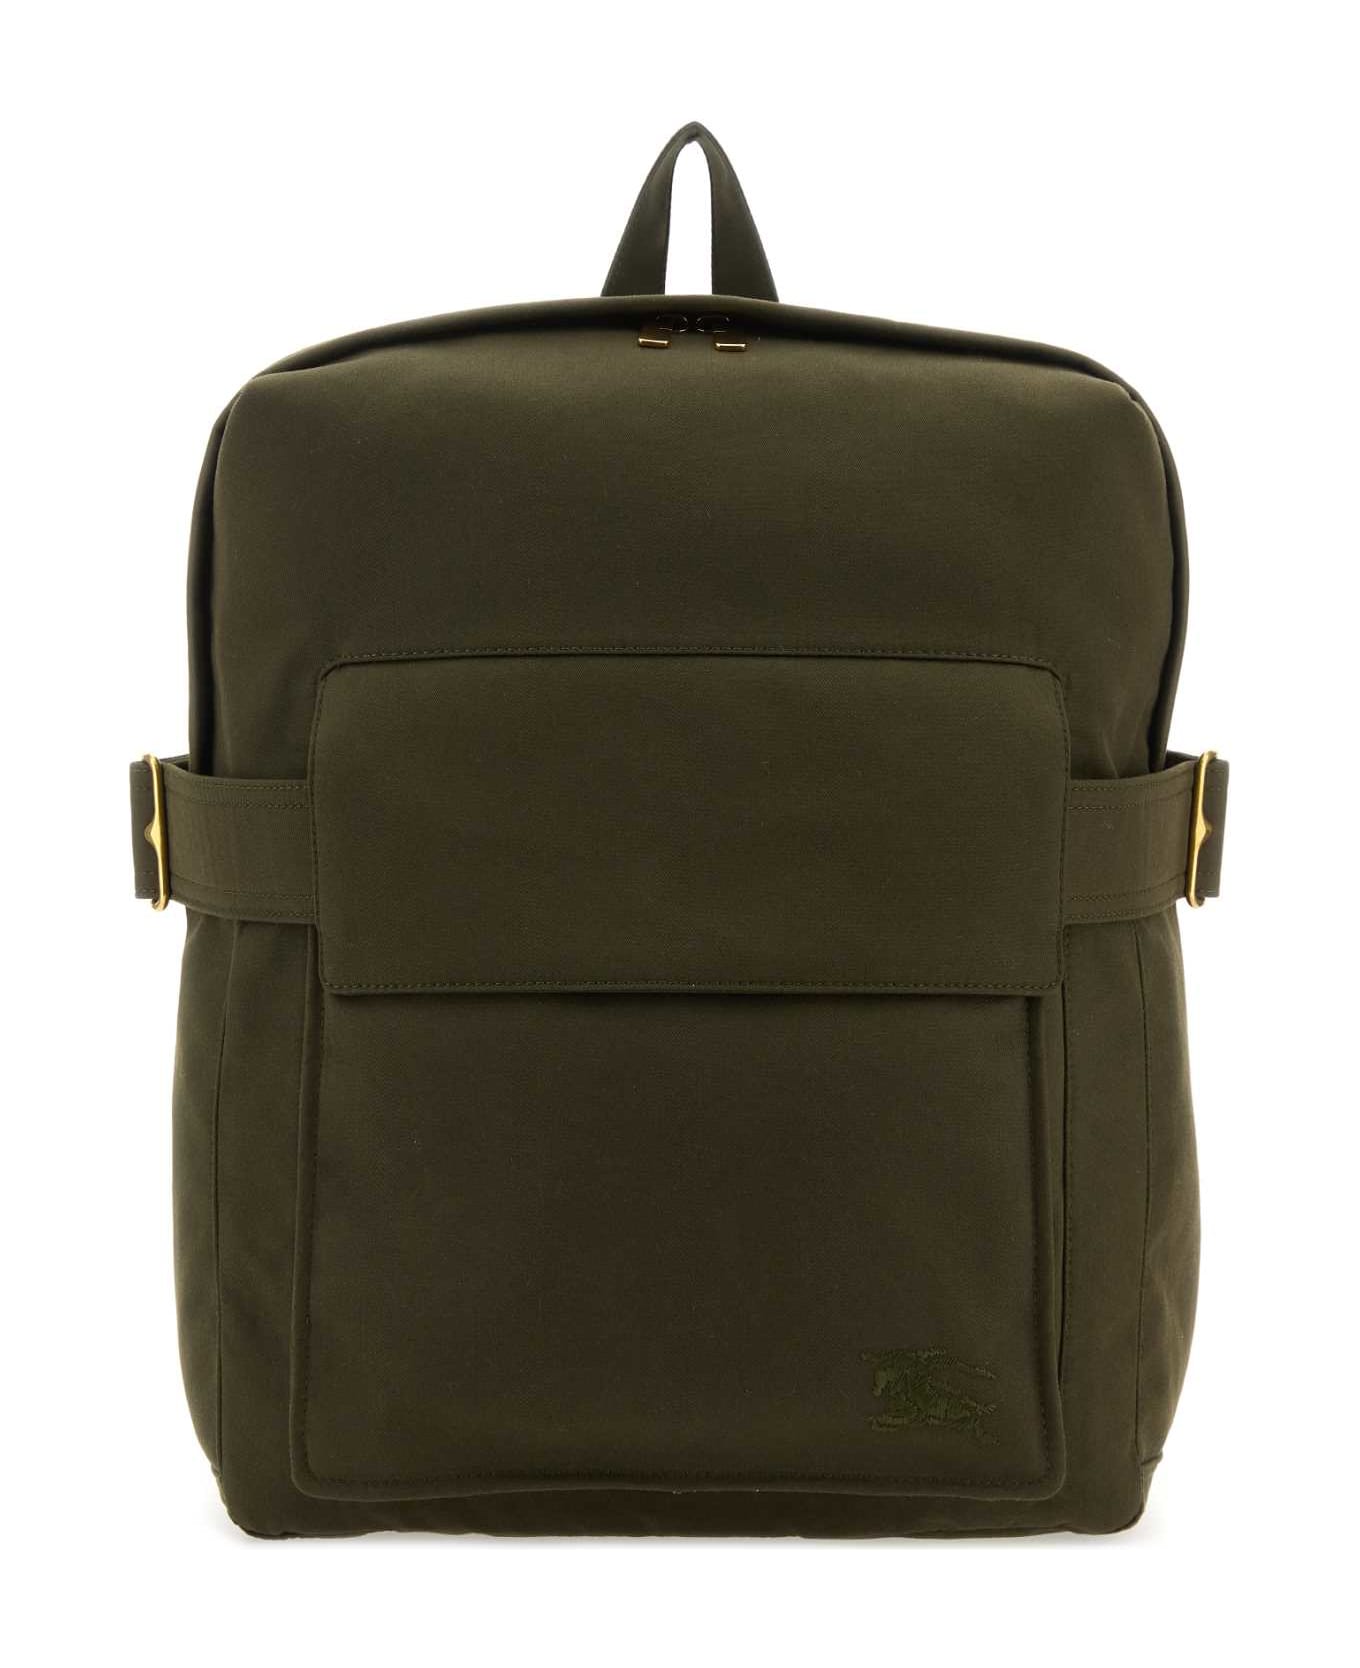 Burberry Army Green Polyester Blend Trench Backpack - MILITARY バックパック